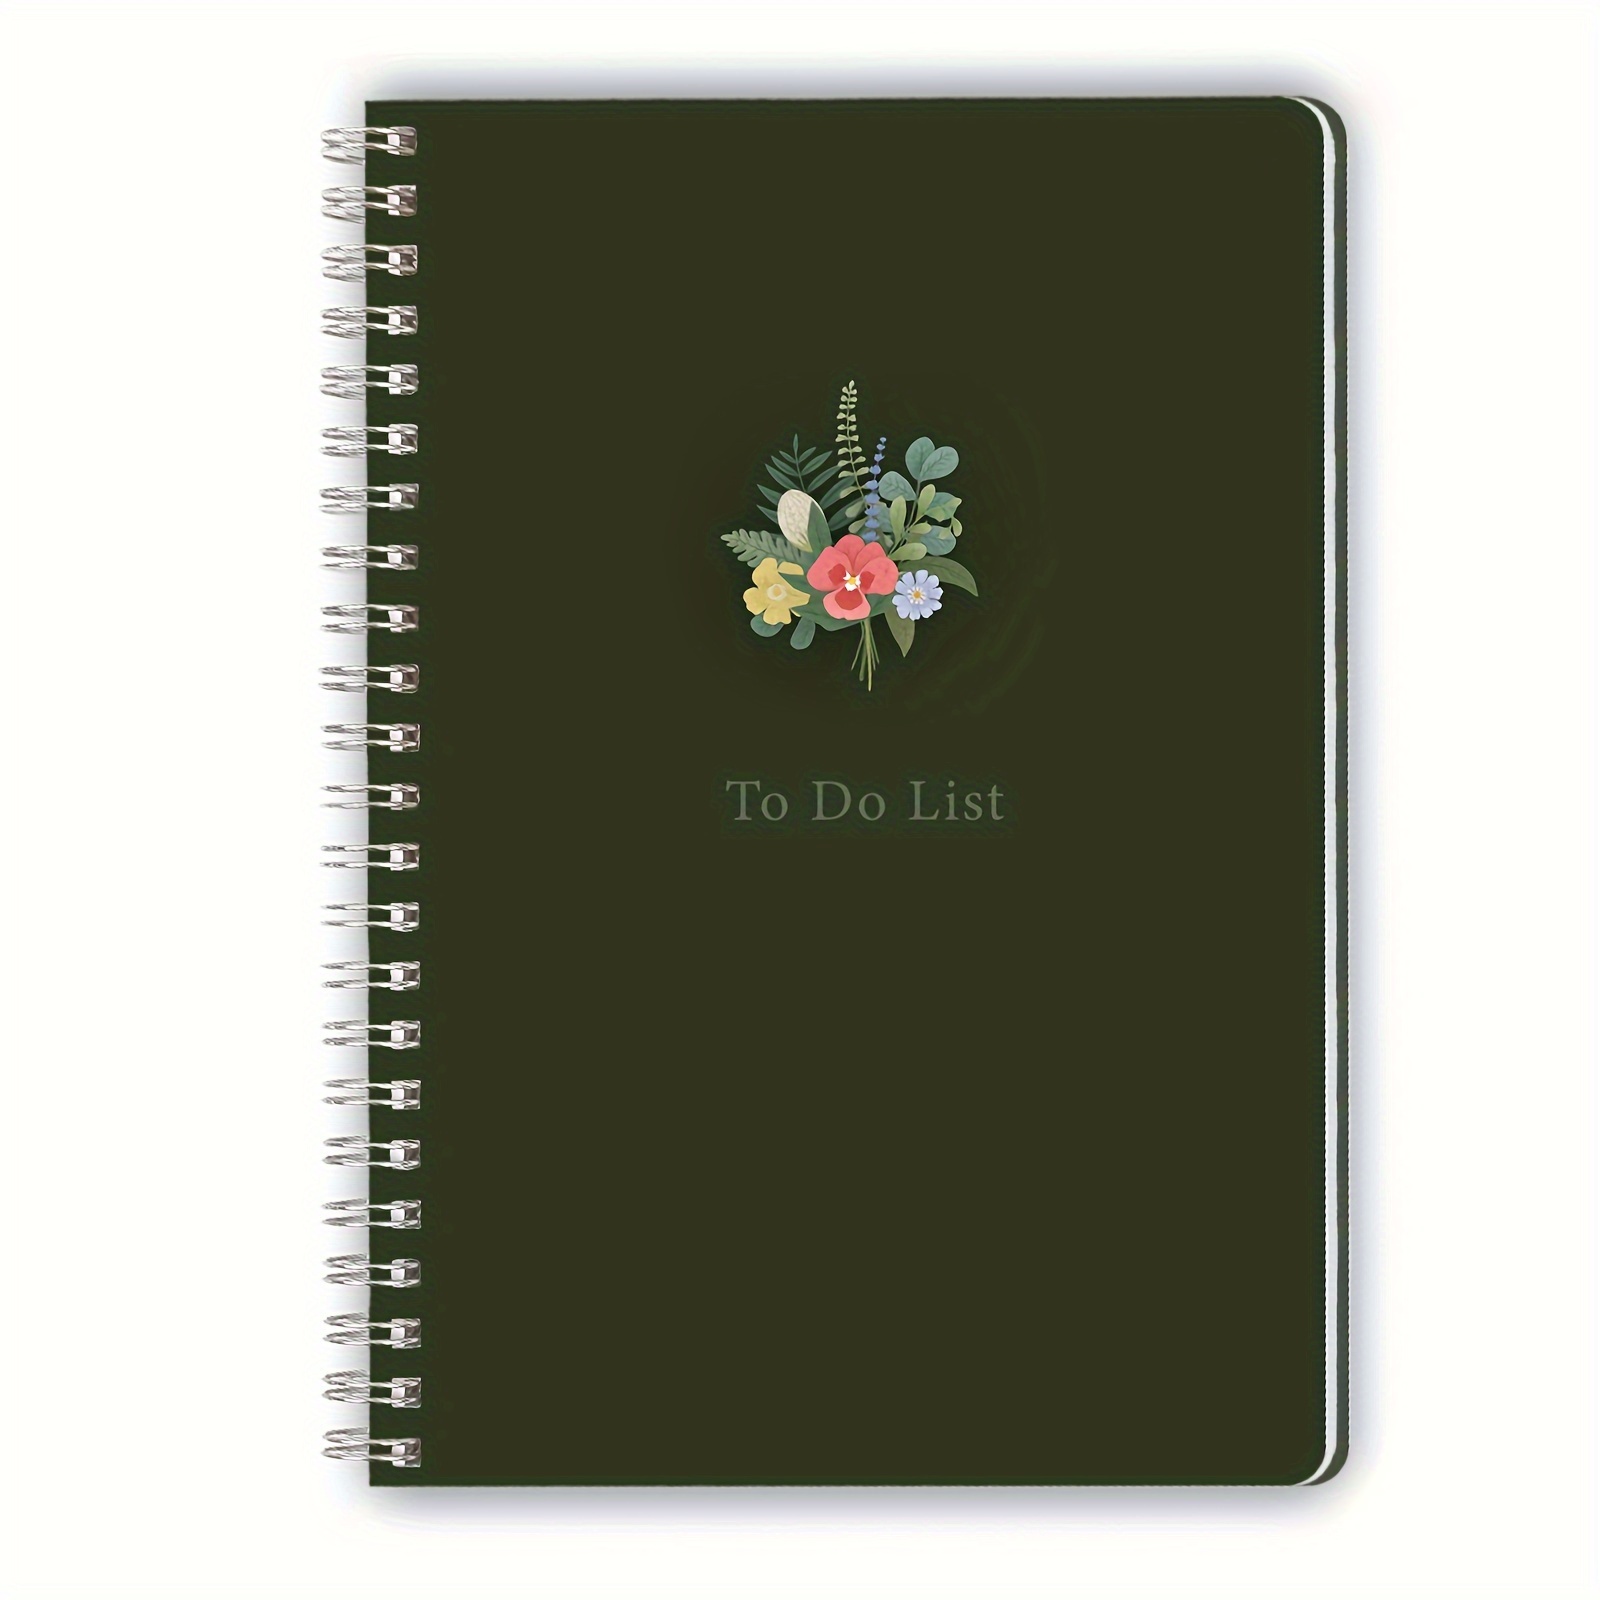 Agenda 52 Non-Dated Planner Floral